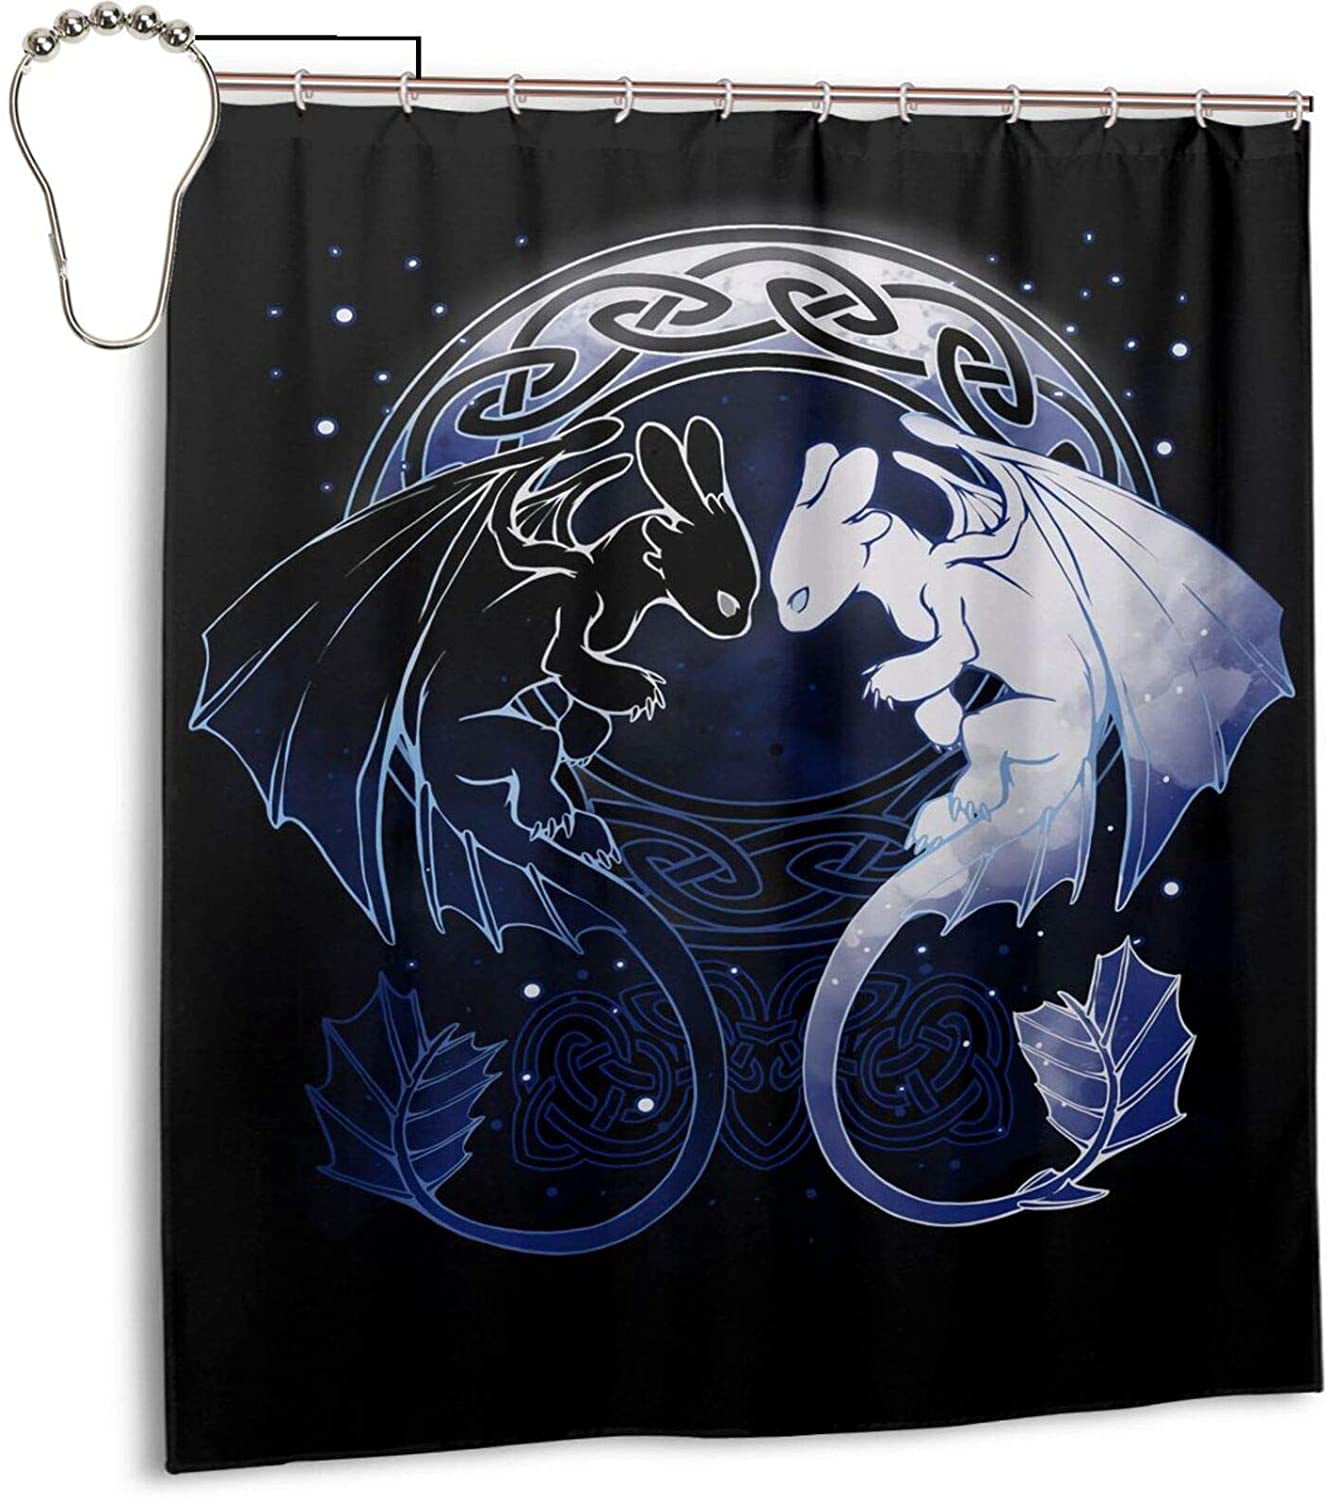 How to Train Your Dragon Waterproof Shower Curtain Bath Wall Hanging Hook 3 Size 